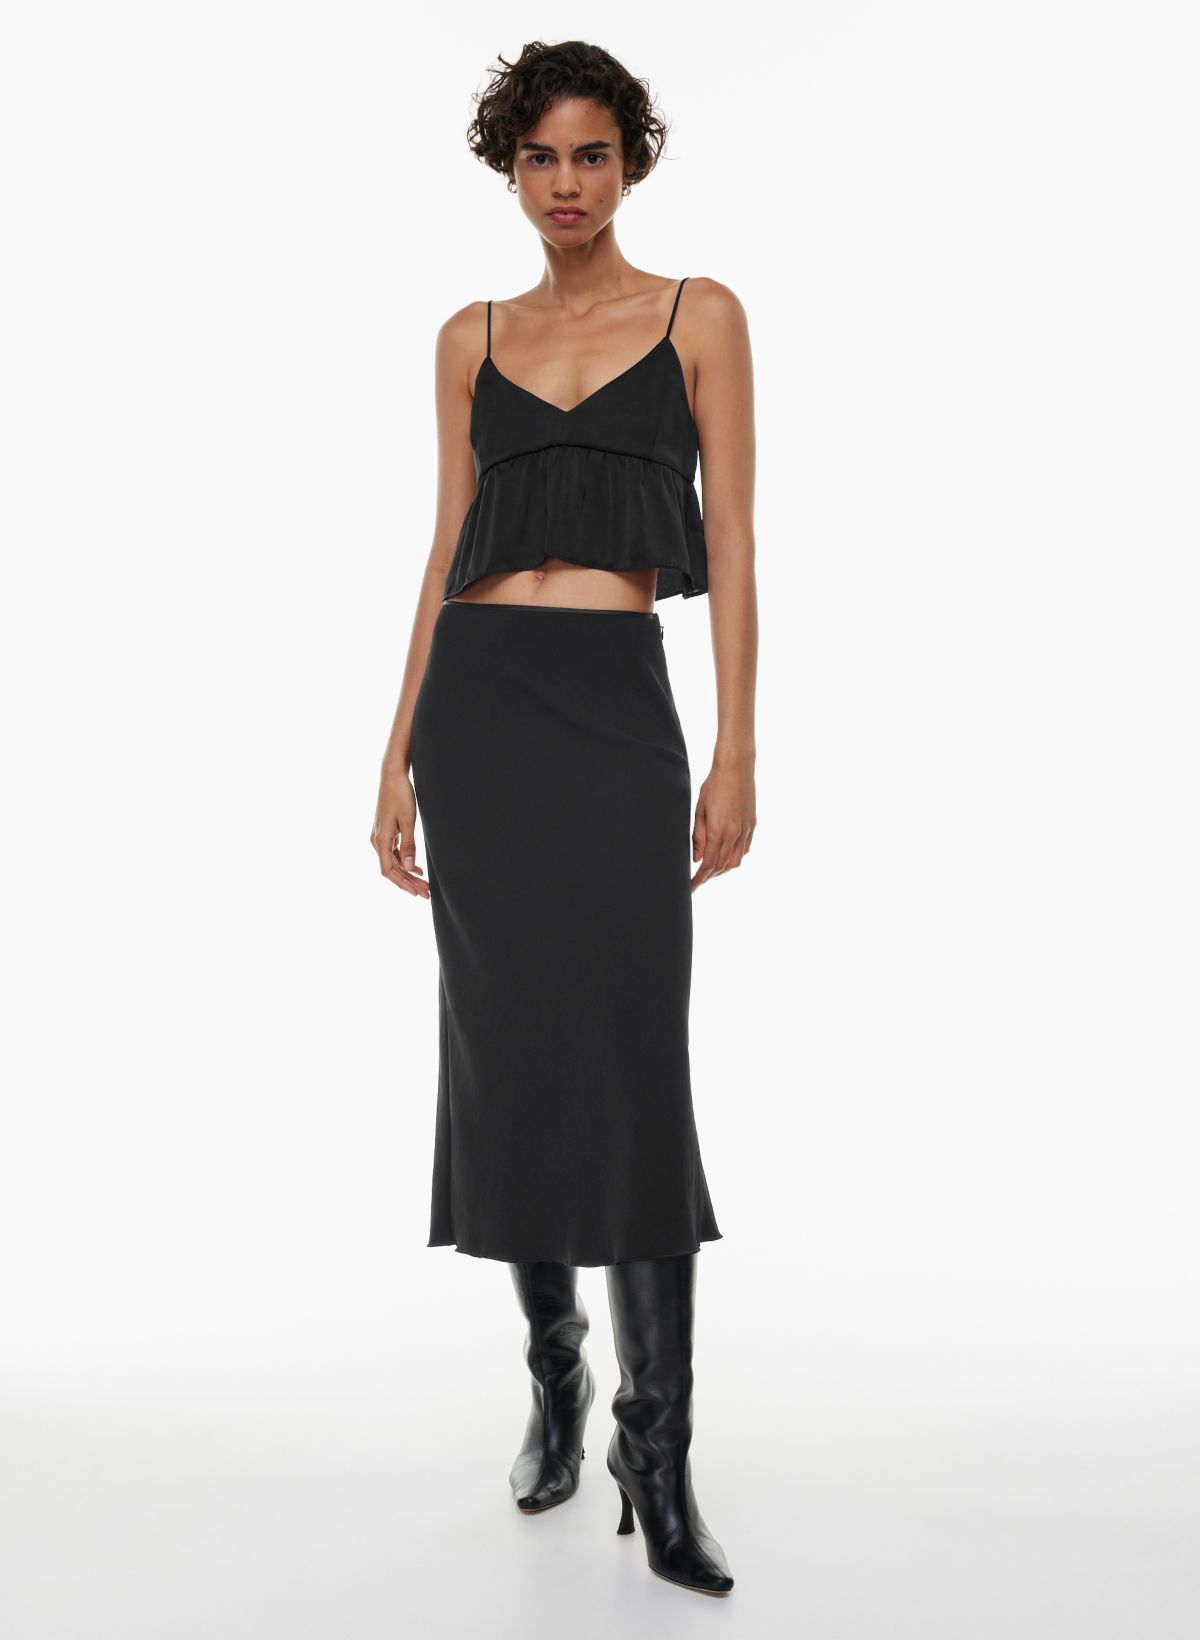 Buy Friends Like These Black Strappy Sleeveless Satin Cami Top